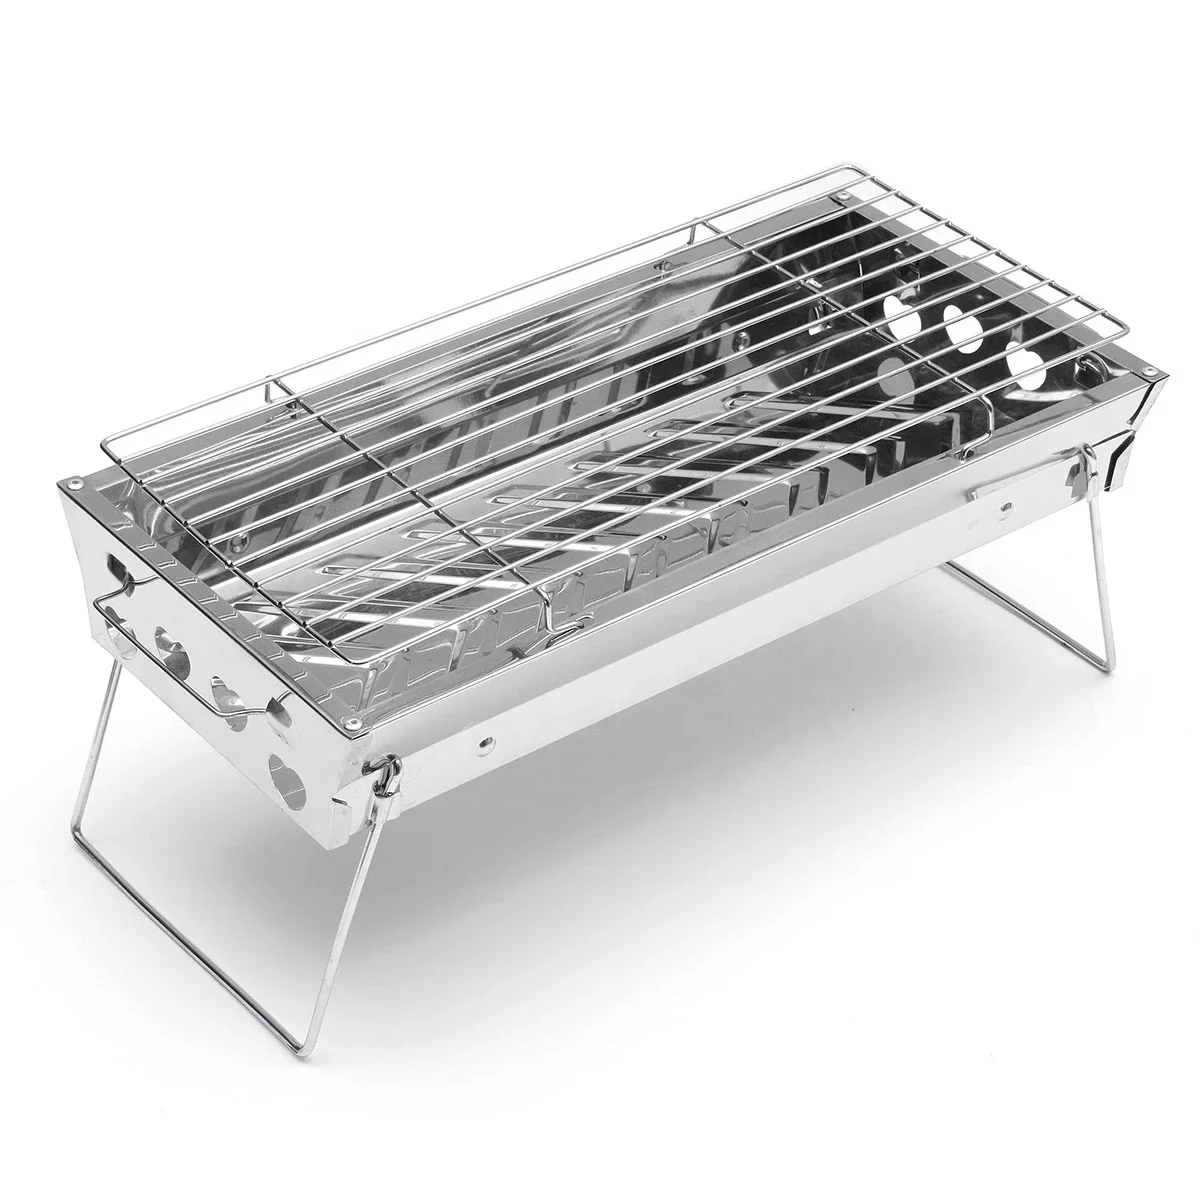 

TY Picnic BBQ Charcoal Grills Stainless Steel BBQ Grill Folding BBQ Barbecue Accessories Charcoal Camping Grill, Silver